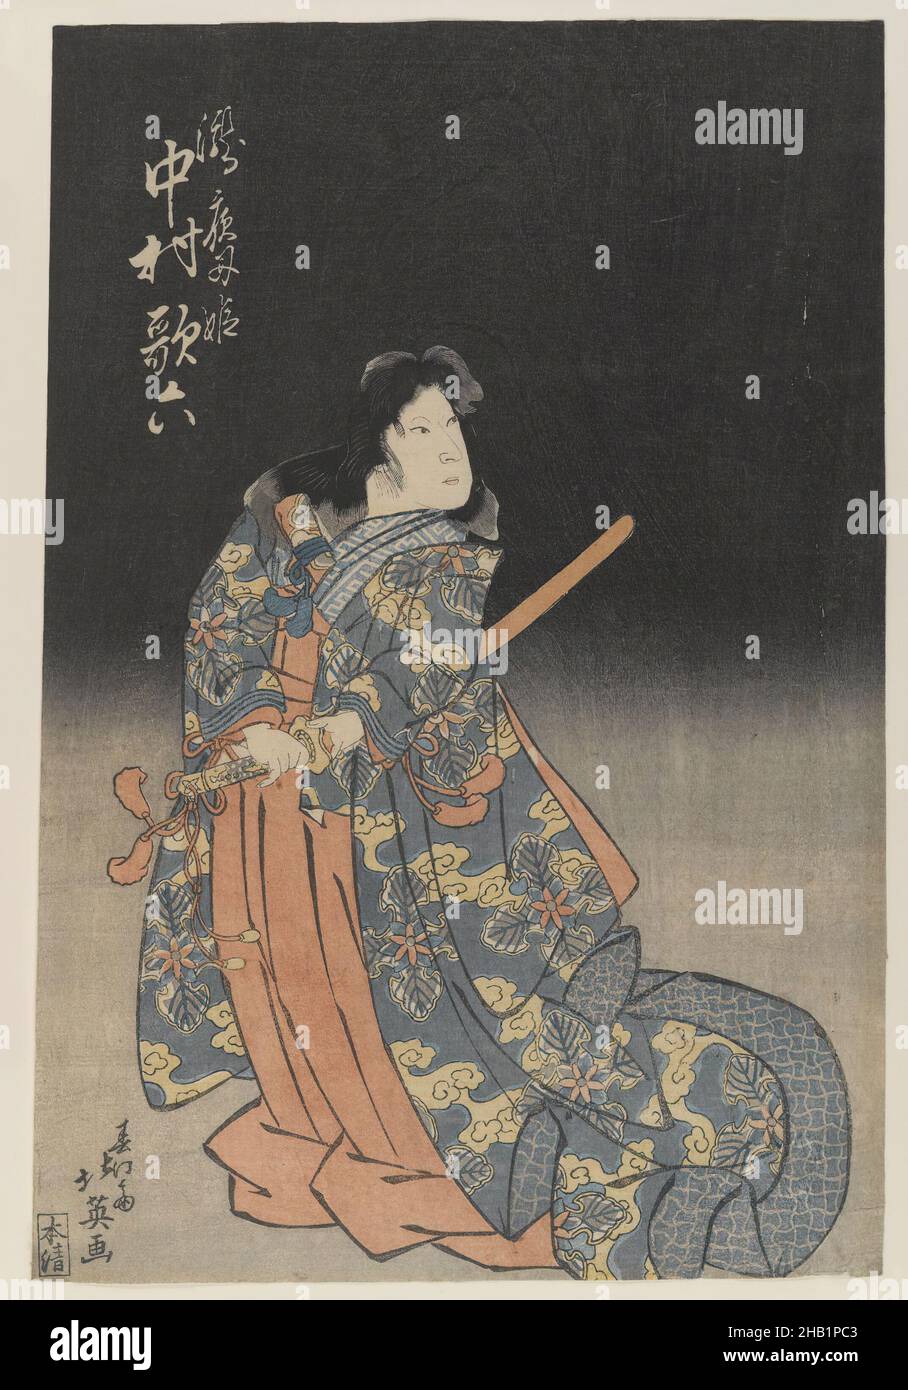 Theatrical Male Character with Sword, Woodblock color print, Japan, mat: 13 7/16 x 9 1/16 in., 34.1 x 23 cm, Acting, Actor, Character, Costume, Edo Period, Japan, Japanese, Kabuki, Poetry, Samurai, Stage, Sword, Theatre, Ukiyo-e Stock Photo